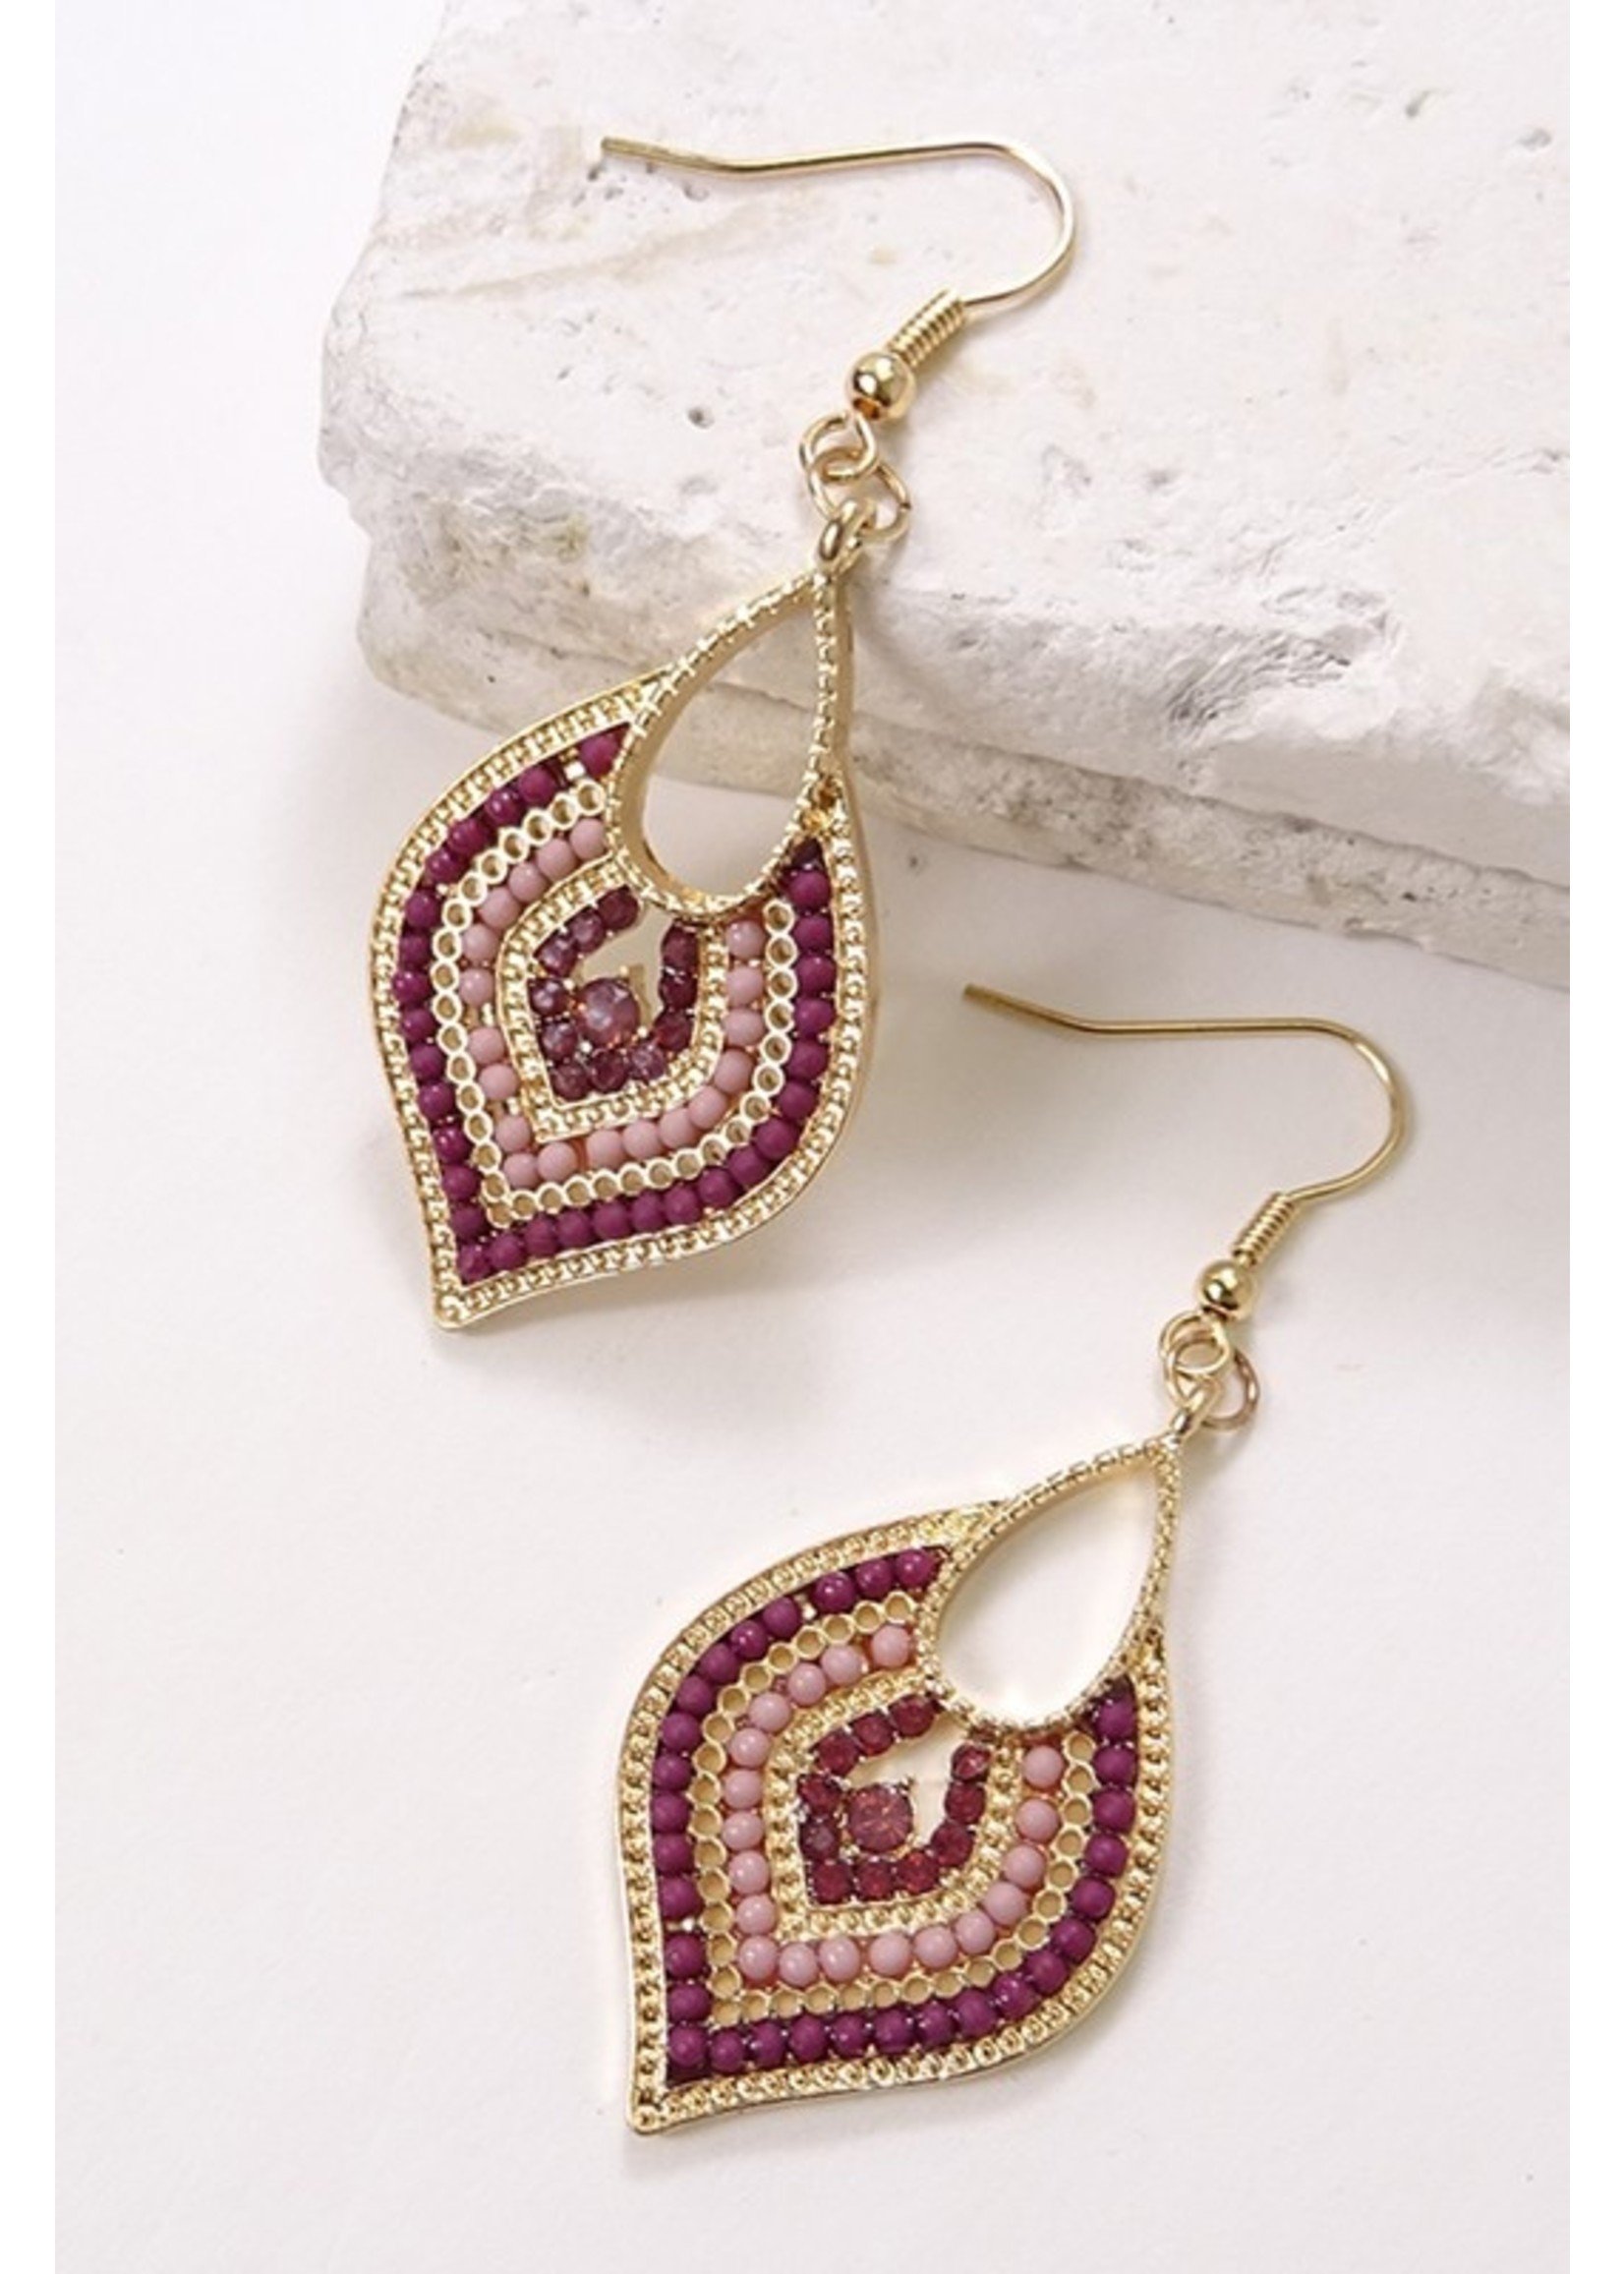 Moroccan beads Gold/Mauve Earing